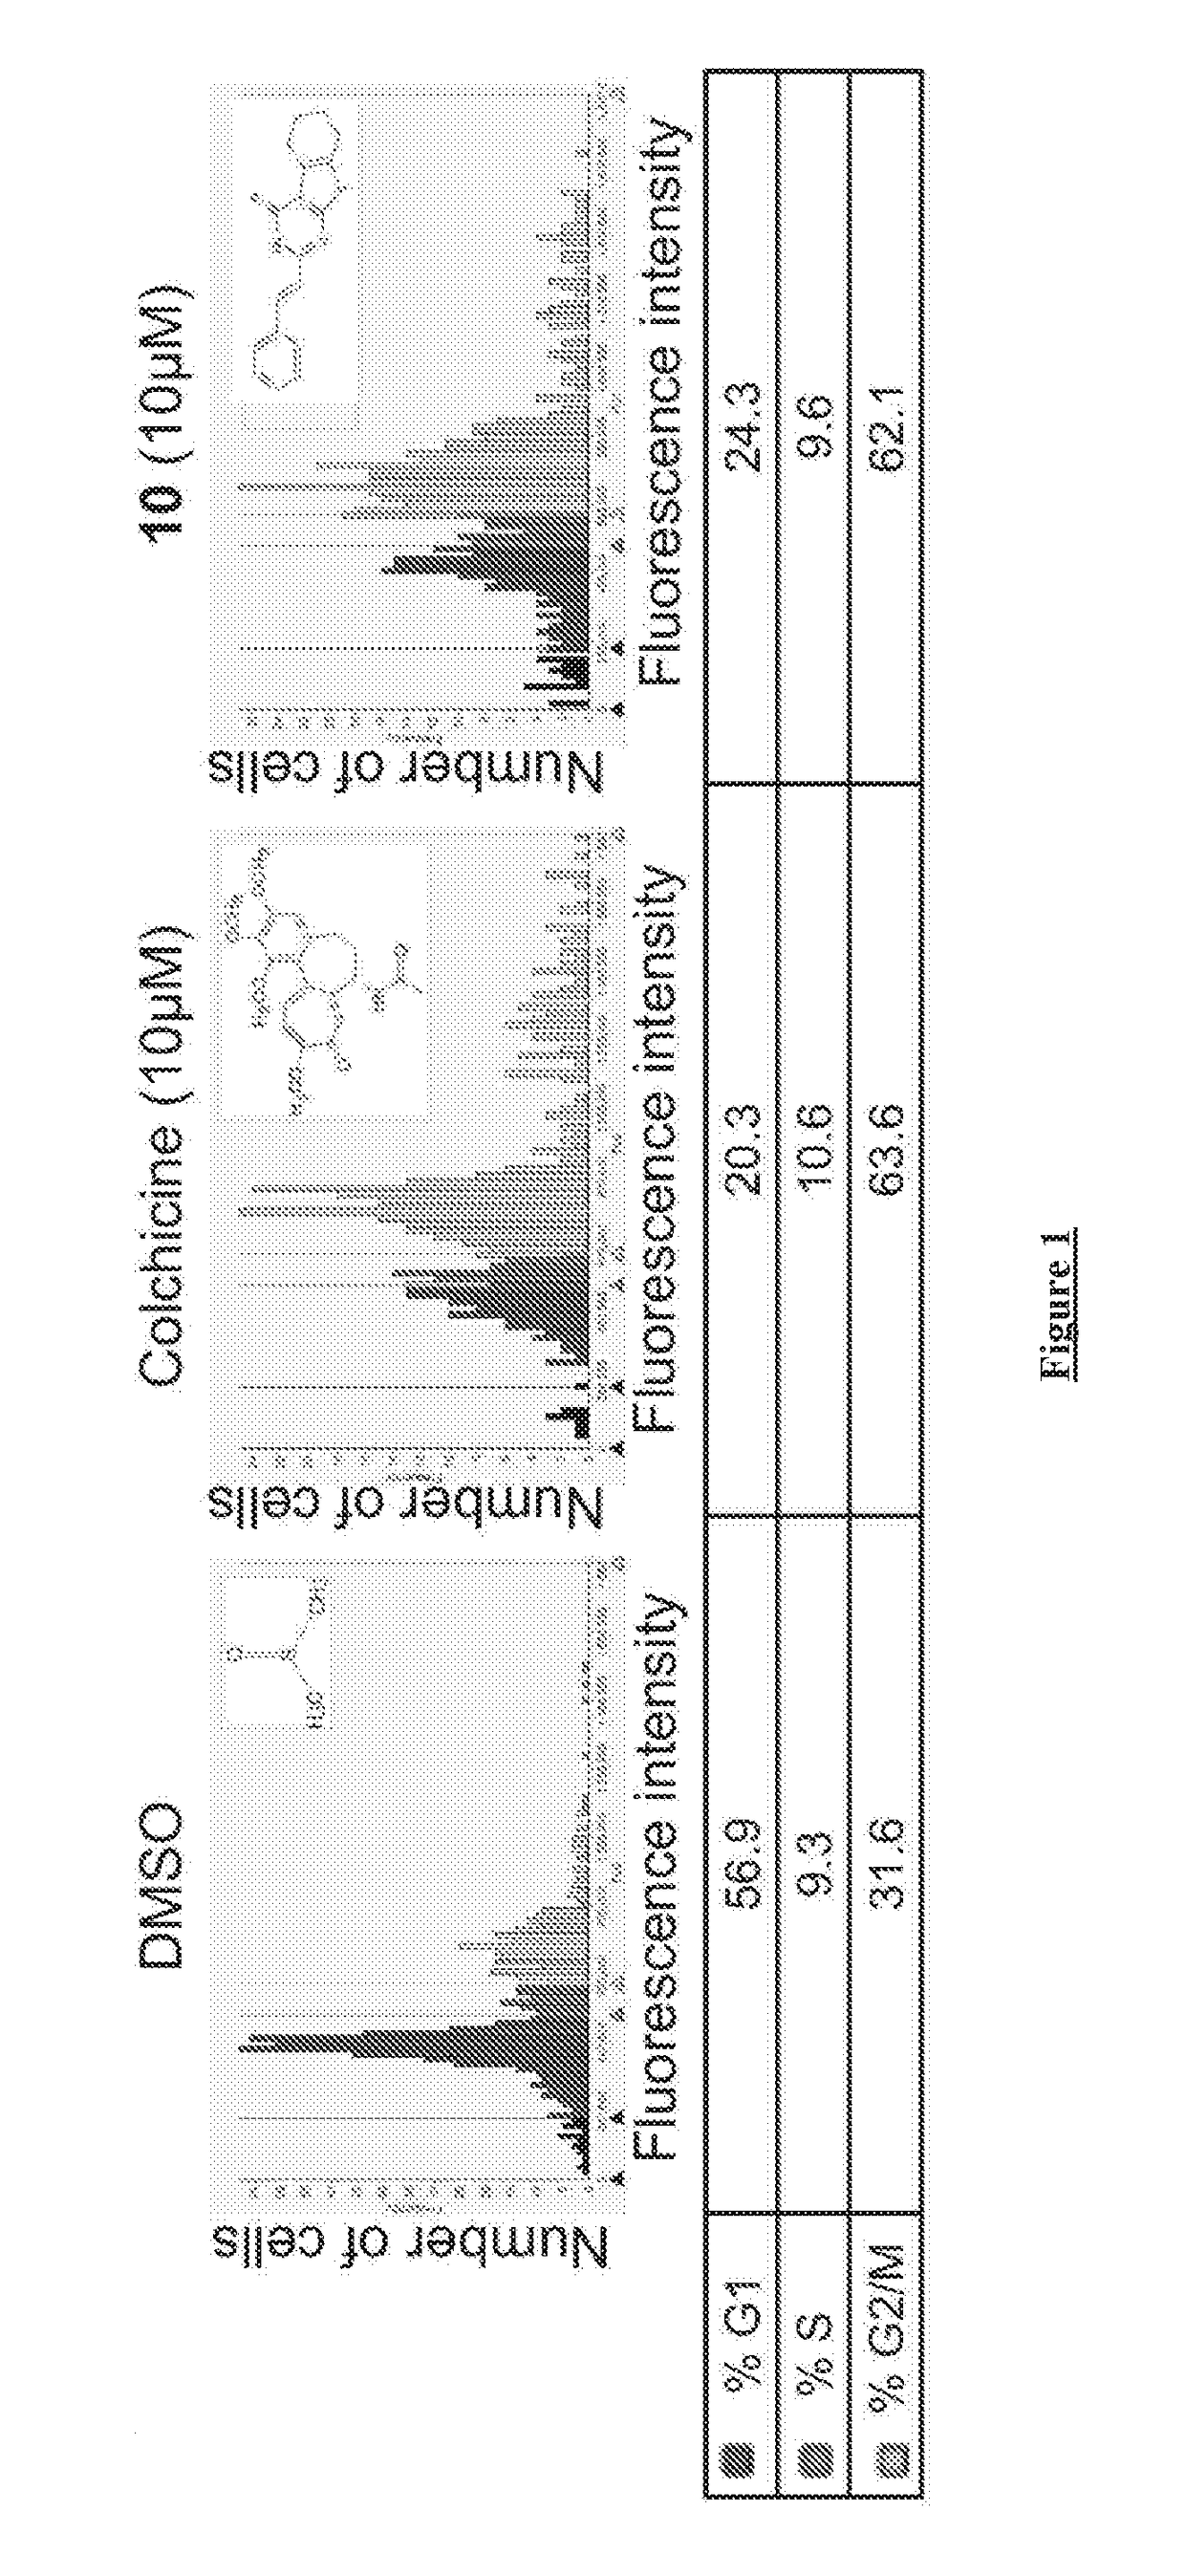 Tubulin-binding compounds, compositions and uses related thereto